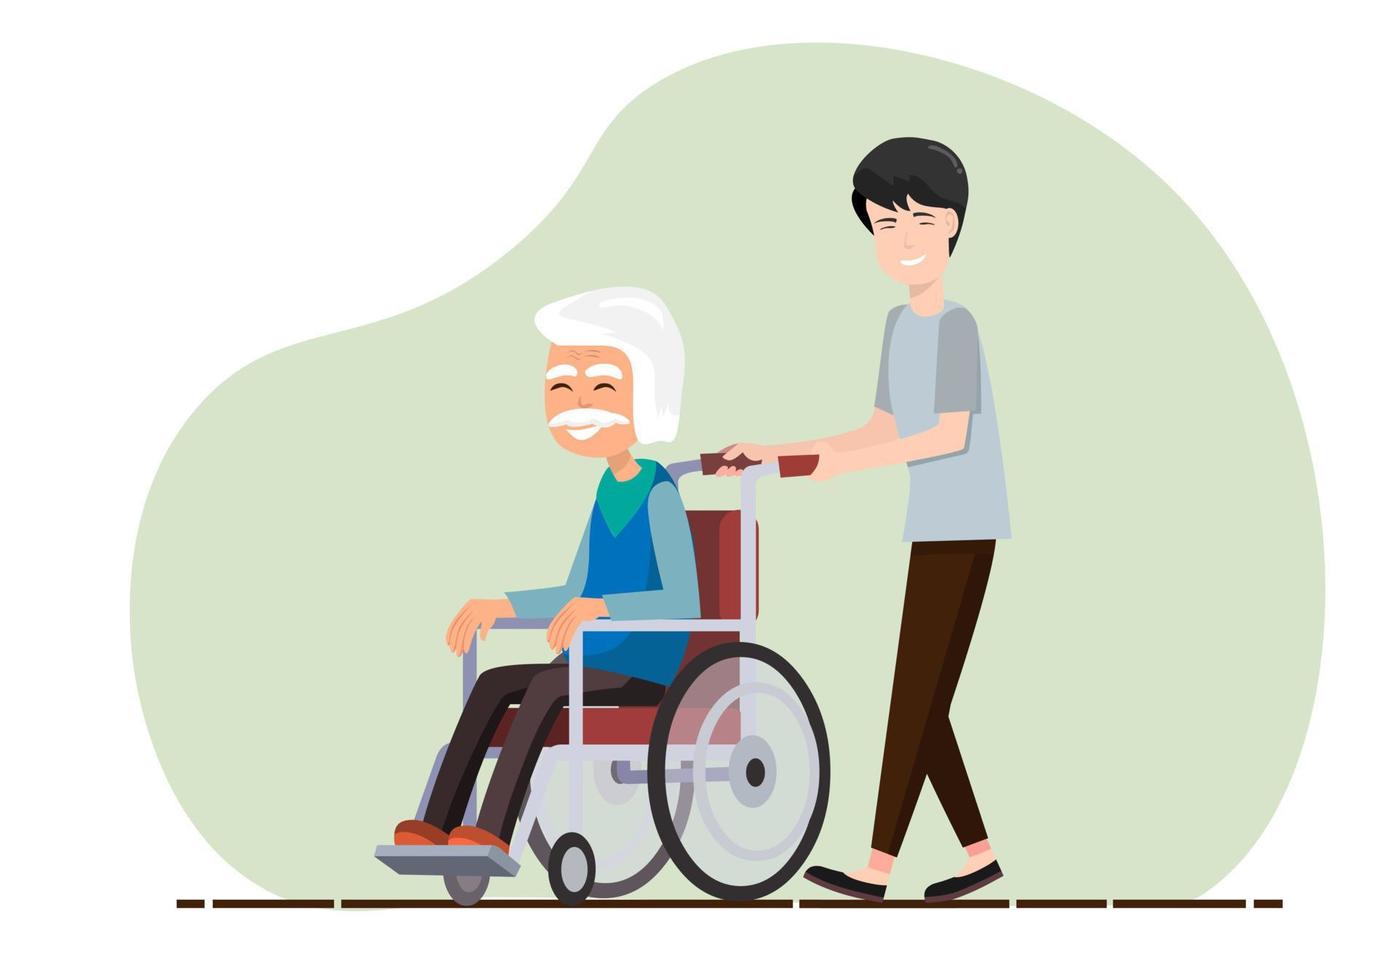 The son takes care of his father who cannot walk. Must be wheelchair Elderly health care concept vector